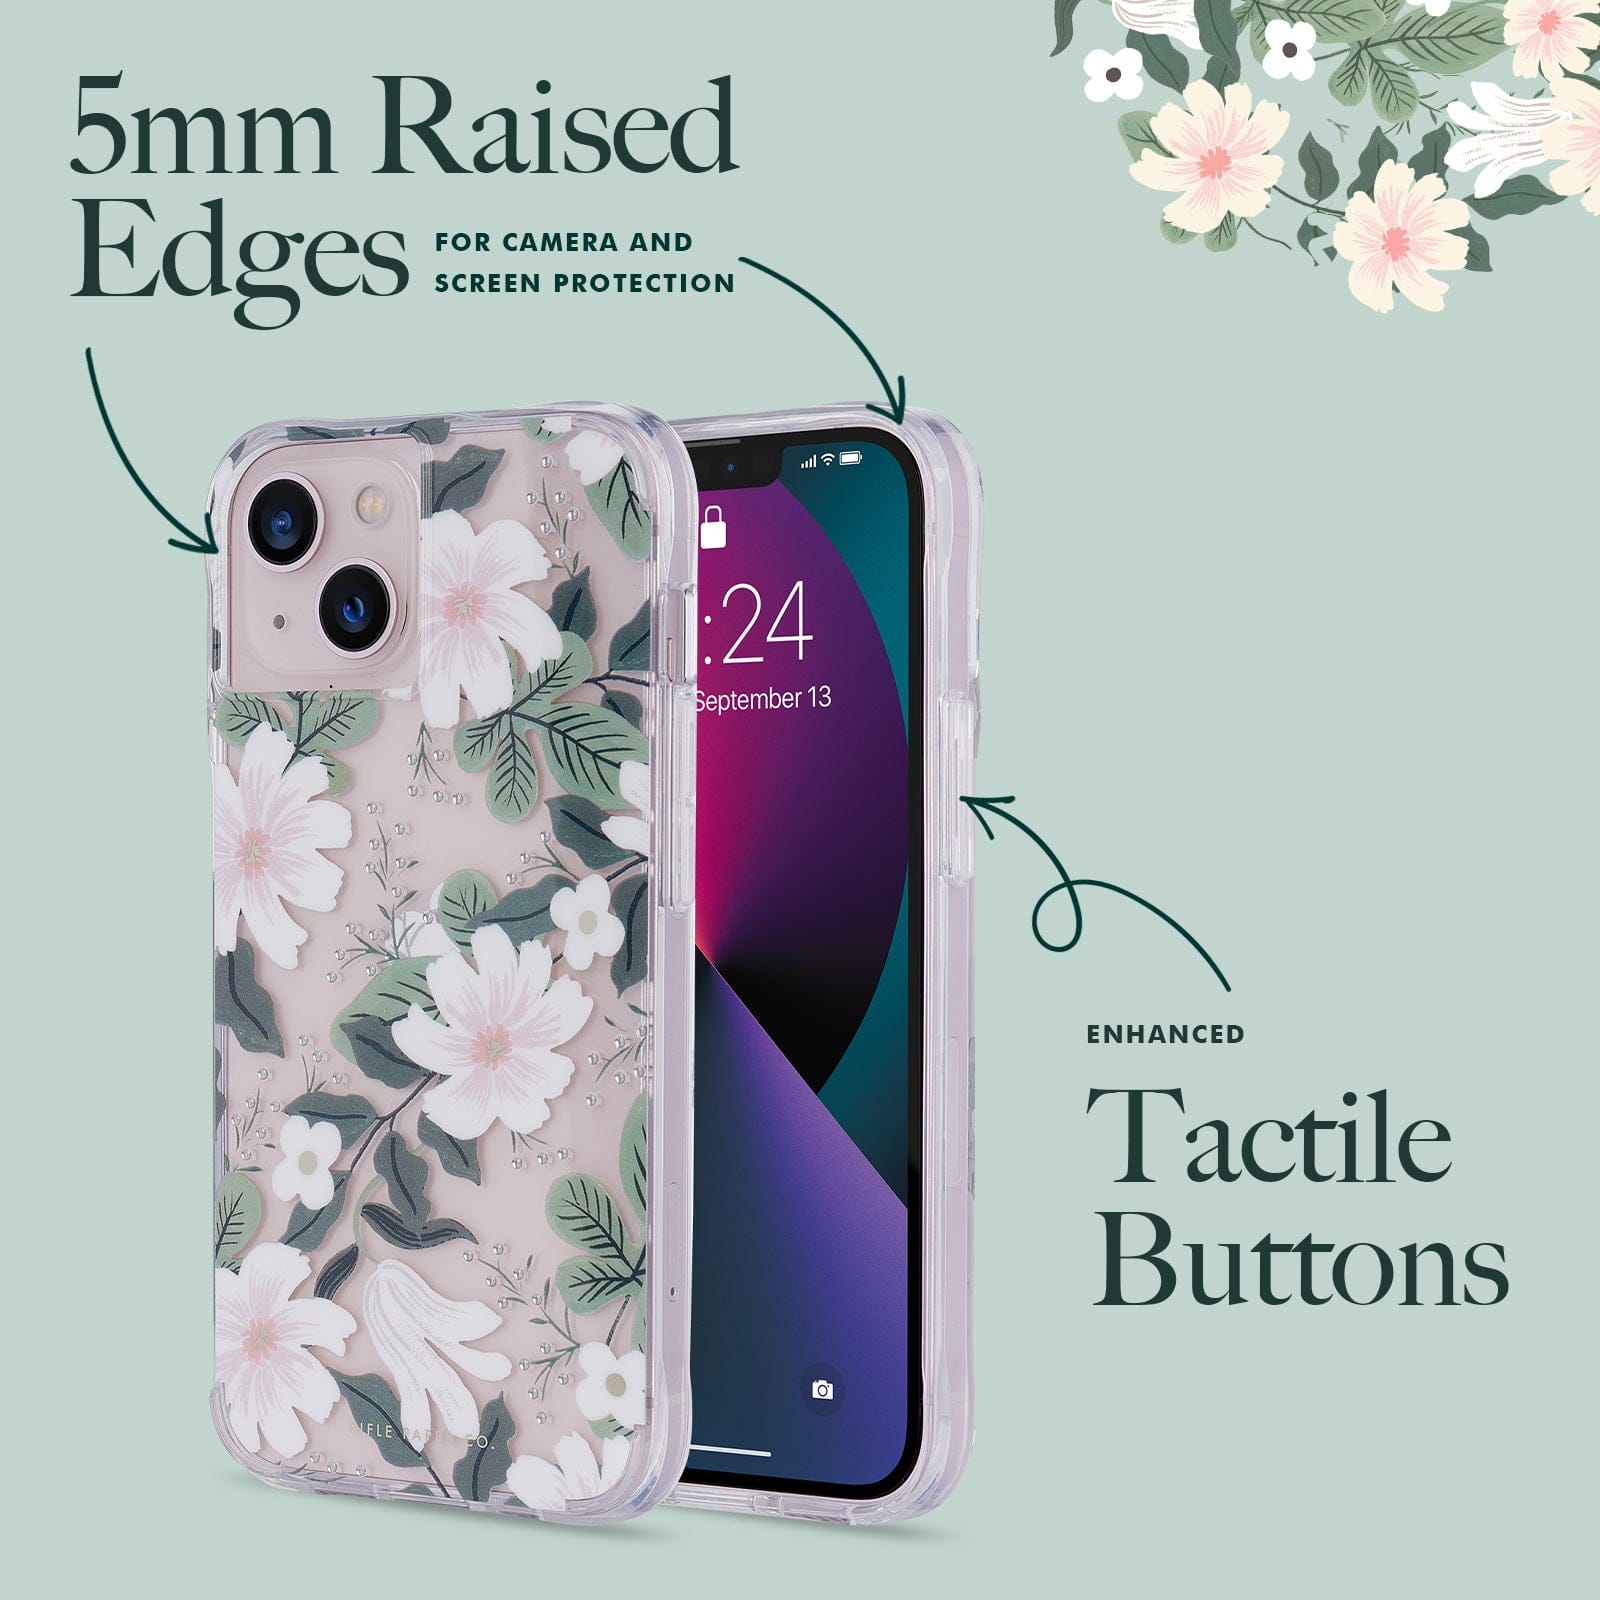 5mm Raised edges for camera and screen protection. Enhanced tactile buttons. COLOR::WILLOW